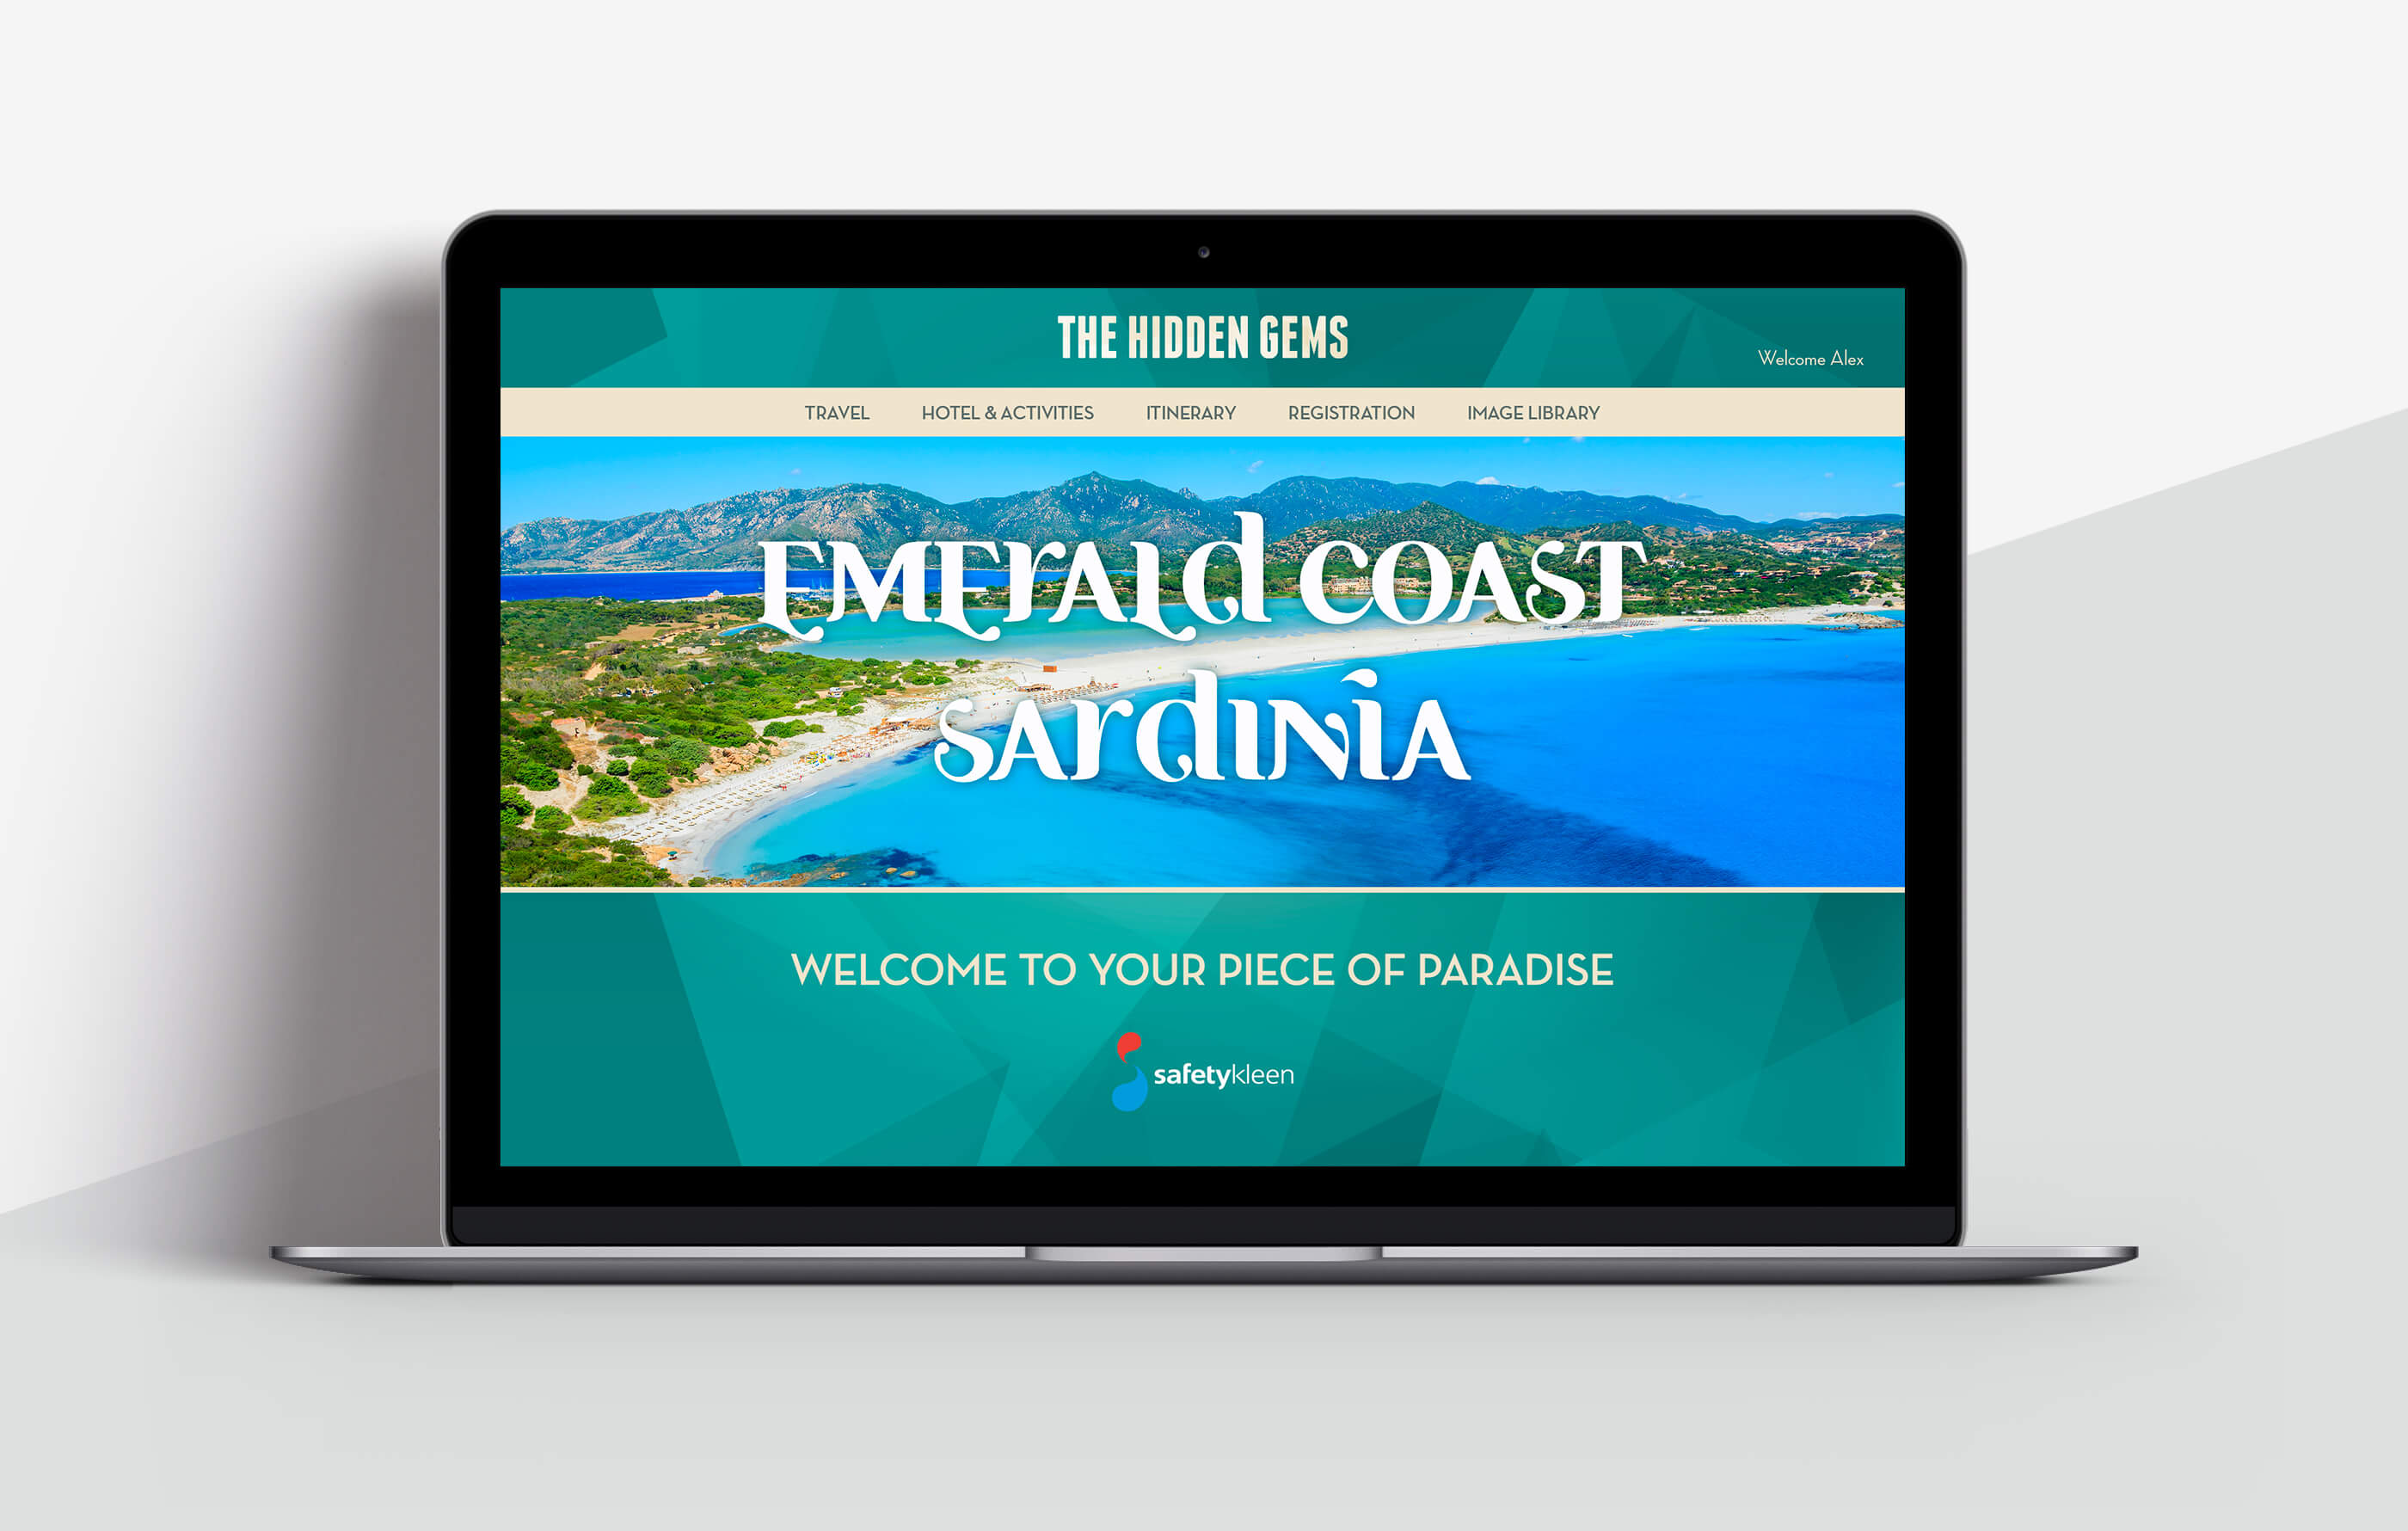 Homepage design of the Safetykleen incentive programme website, featuring a full viewport image of the Emerald Coast and welcoming users to their 'piece of paradise'